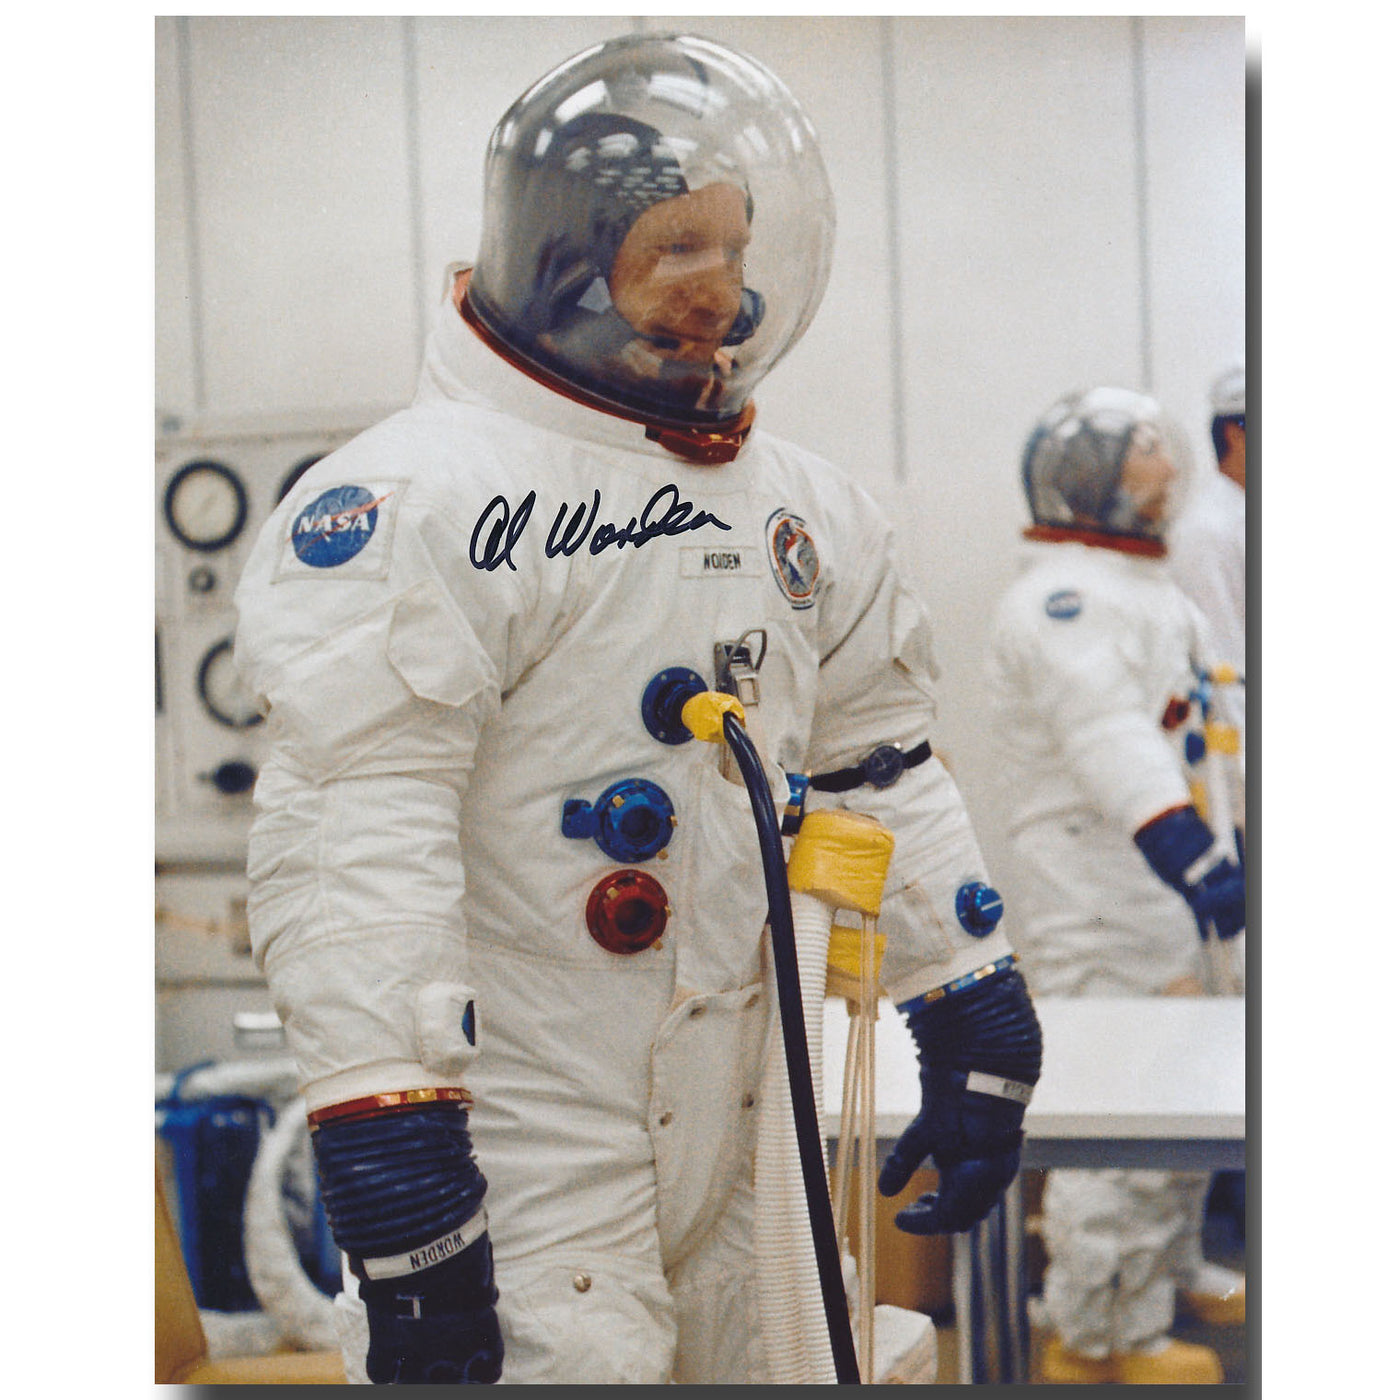 Al Worden – Apollo 15 suiting up hand-signed 8x10 glossy photo